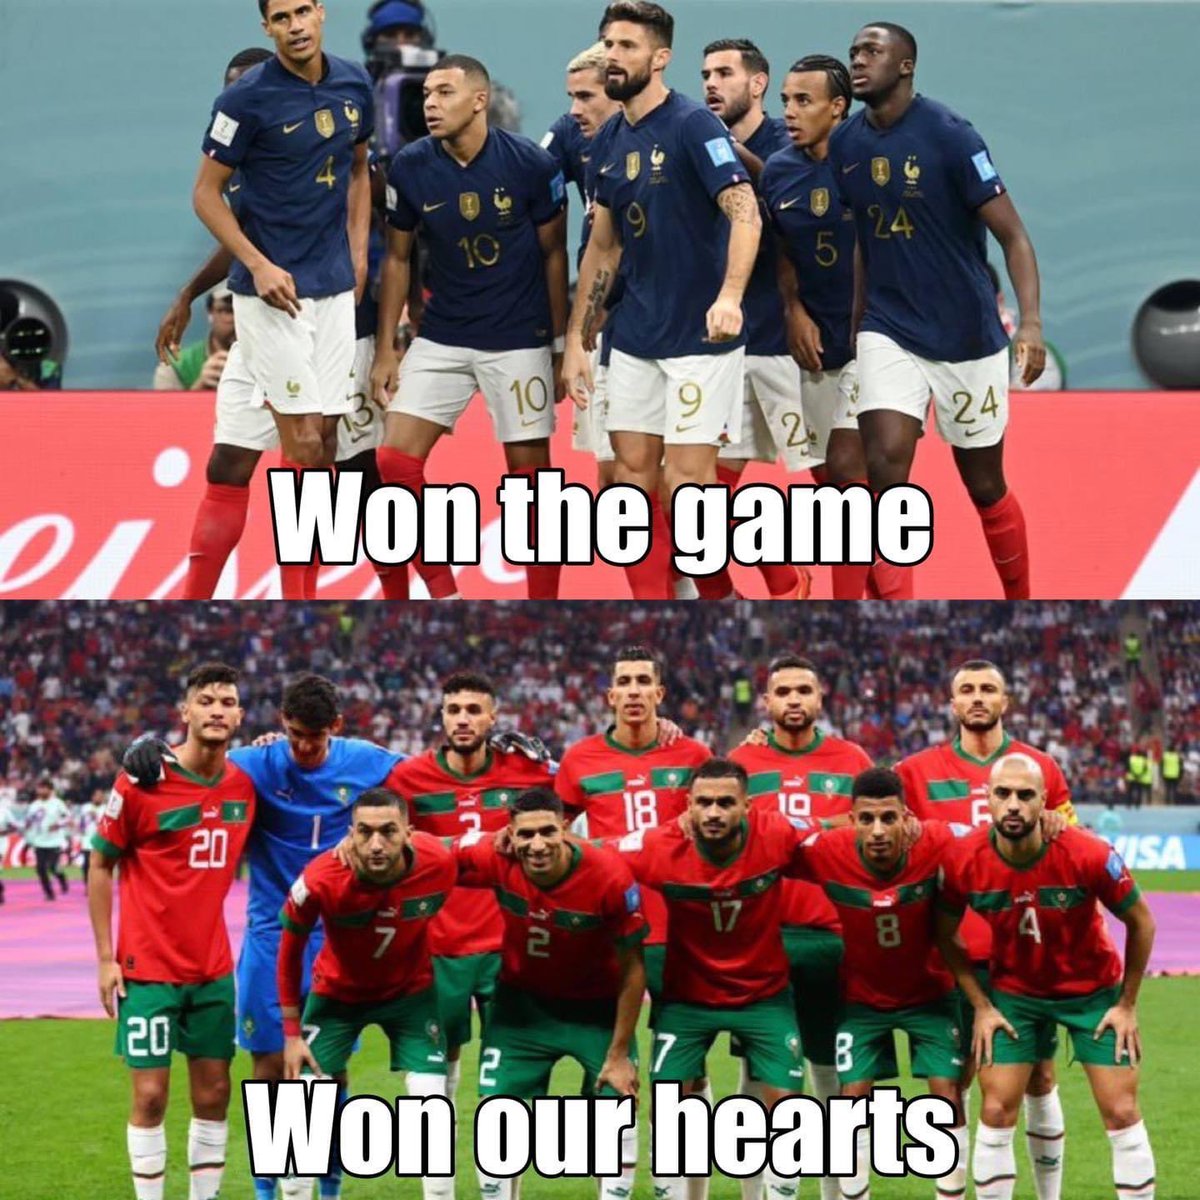 @FIFAWorldCup 🇲🇦 won our hearts 🫶